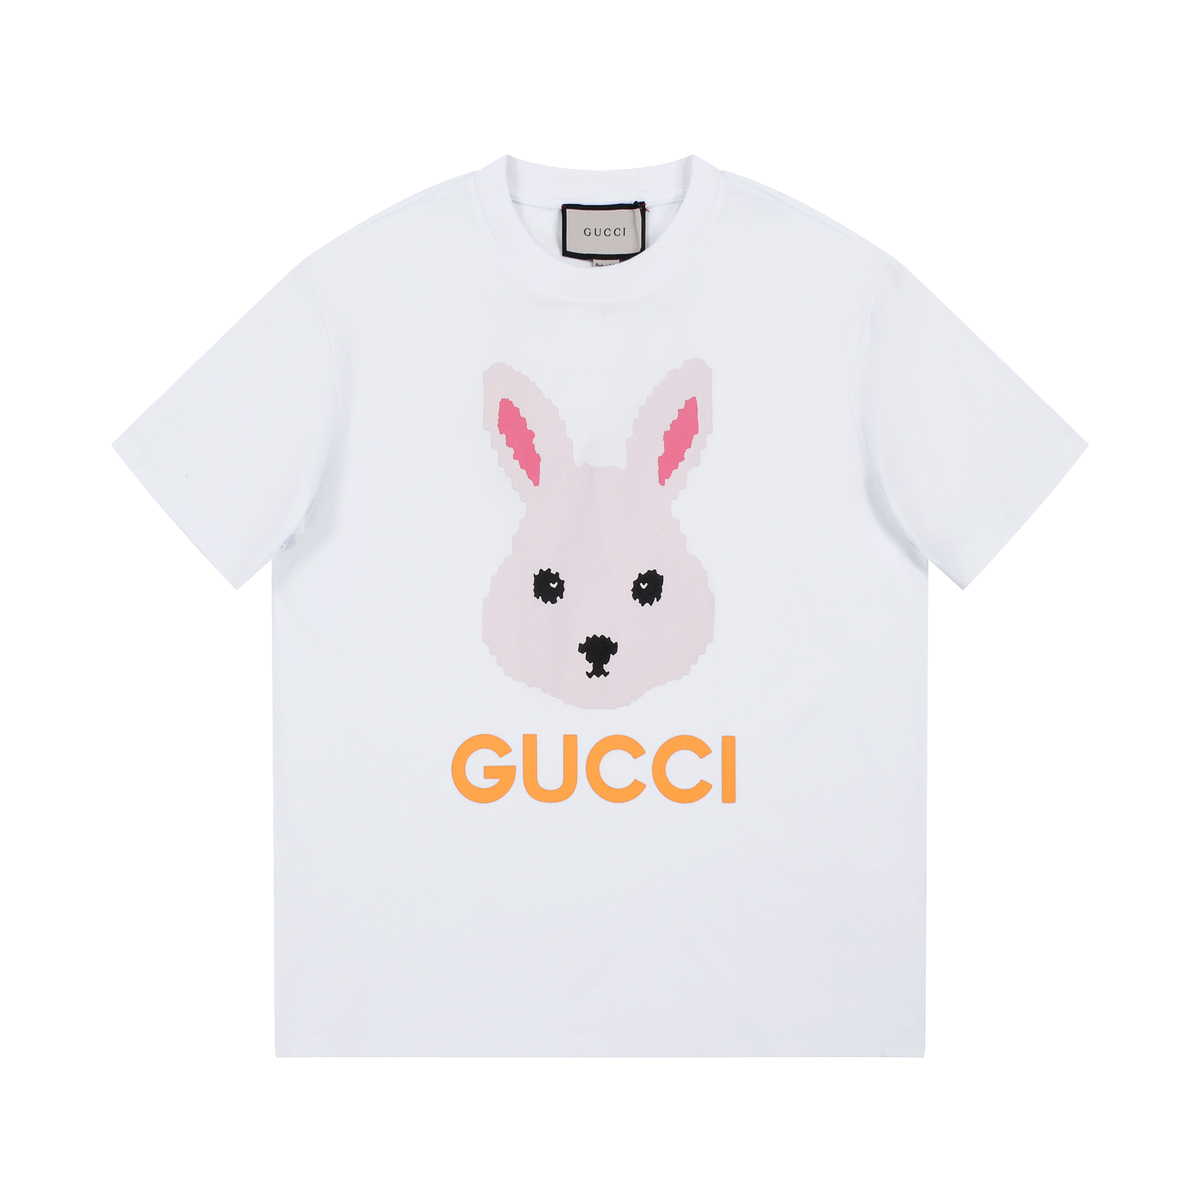 Gucci Summer Cute Rabbit Printed Cotton Breathable Leisure & Lovely Unisex T-shirt